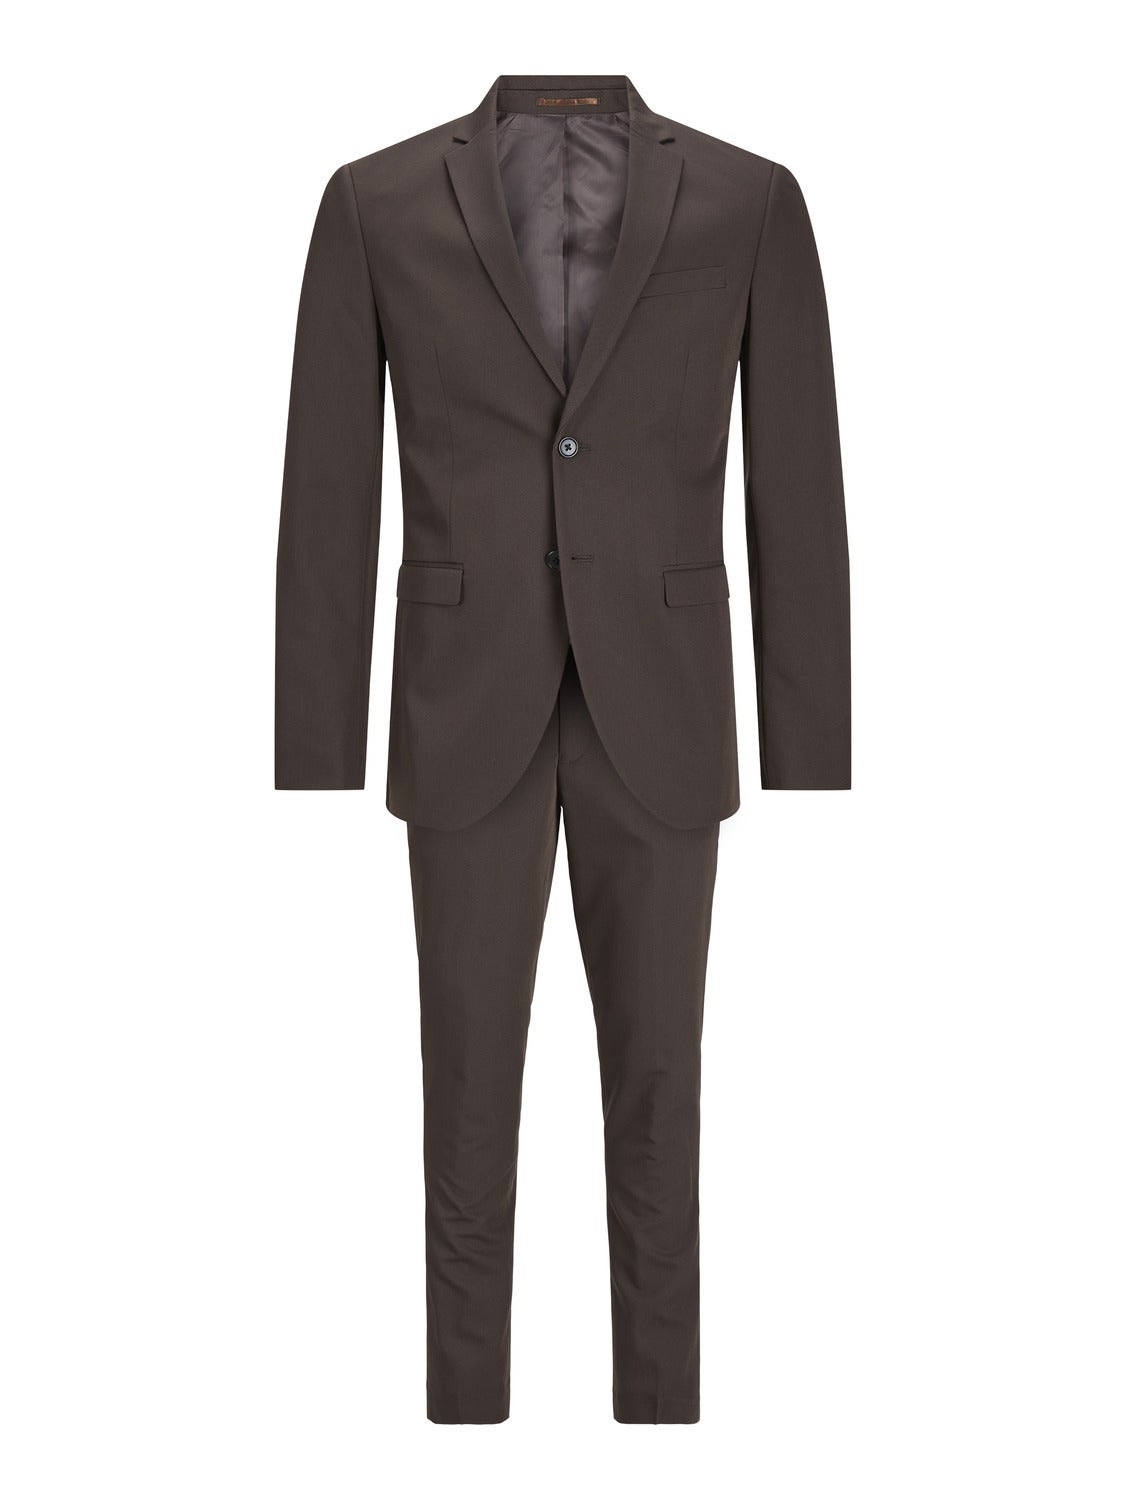 WOMEN'S CHOCOLATE BROWN WOOL SUIT | FRÈRE